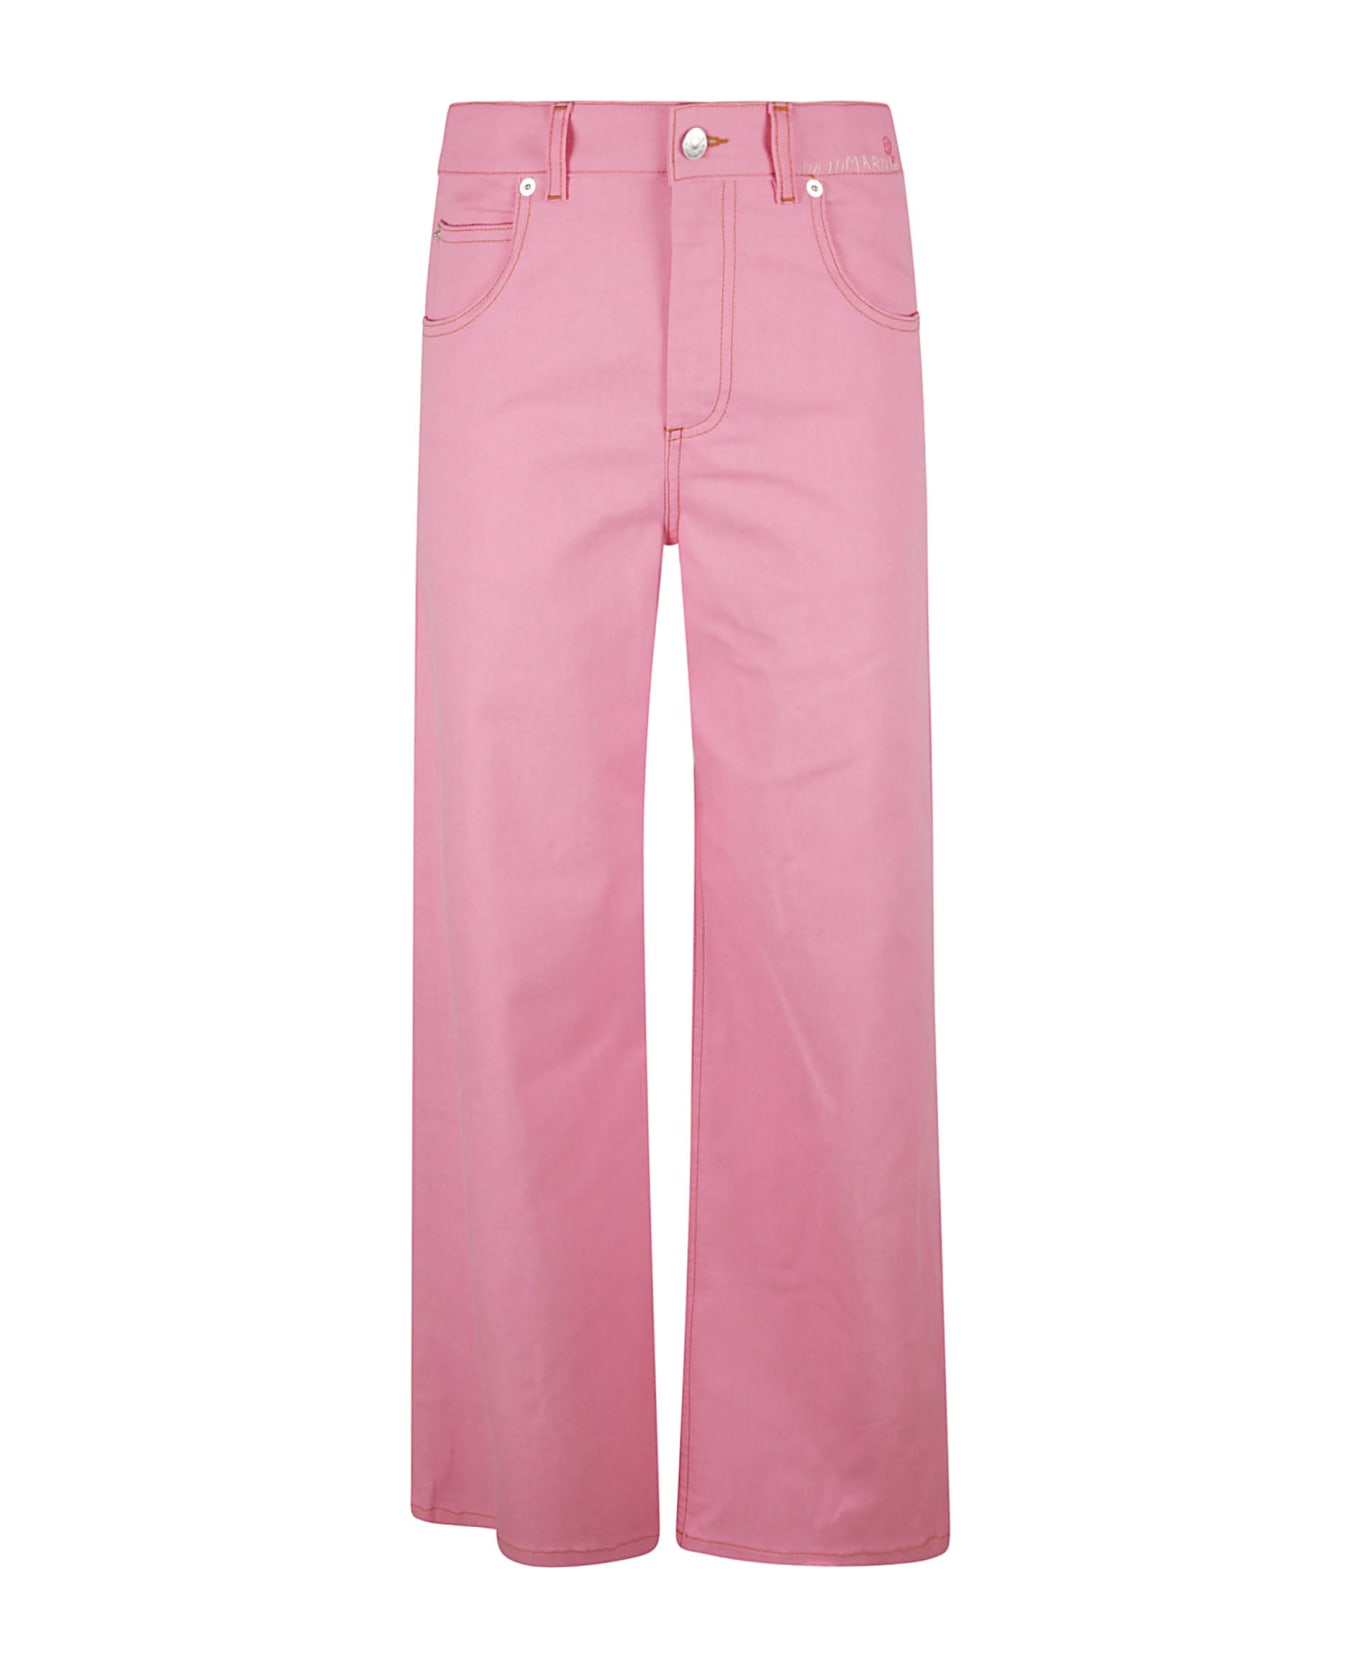 Marni Straight Buttoned Jeans - Pink